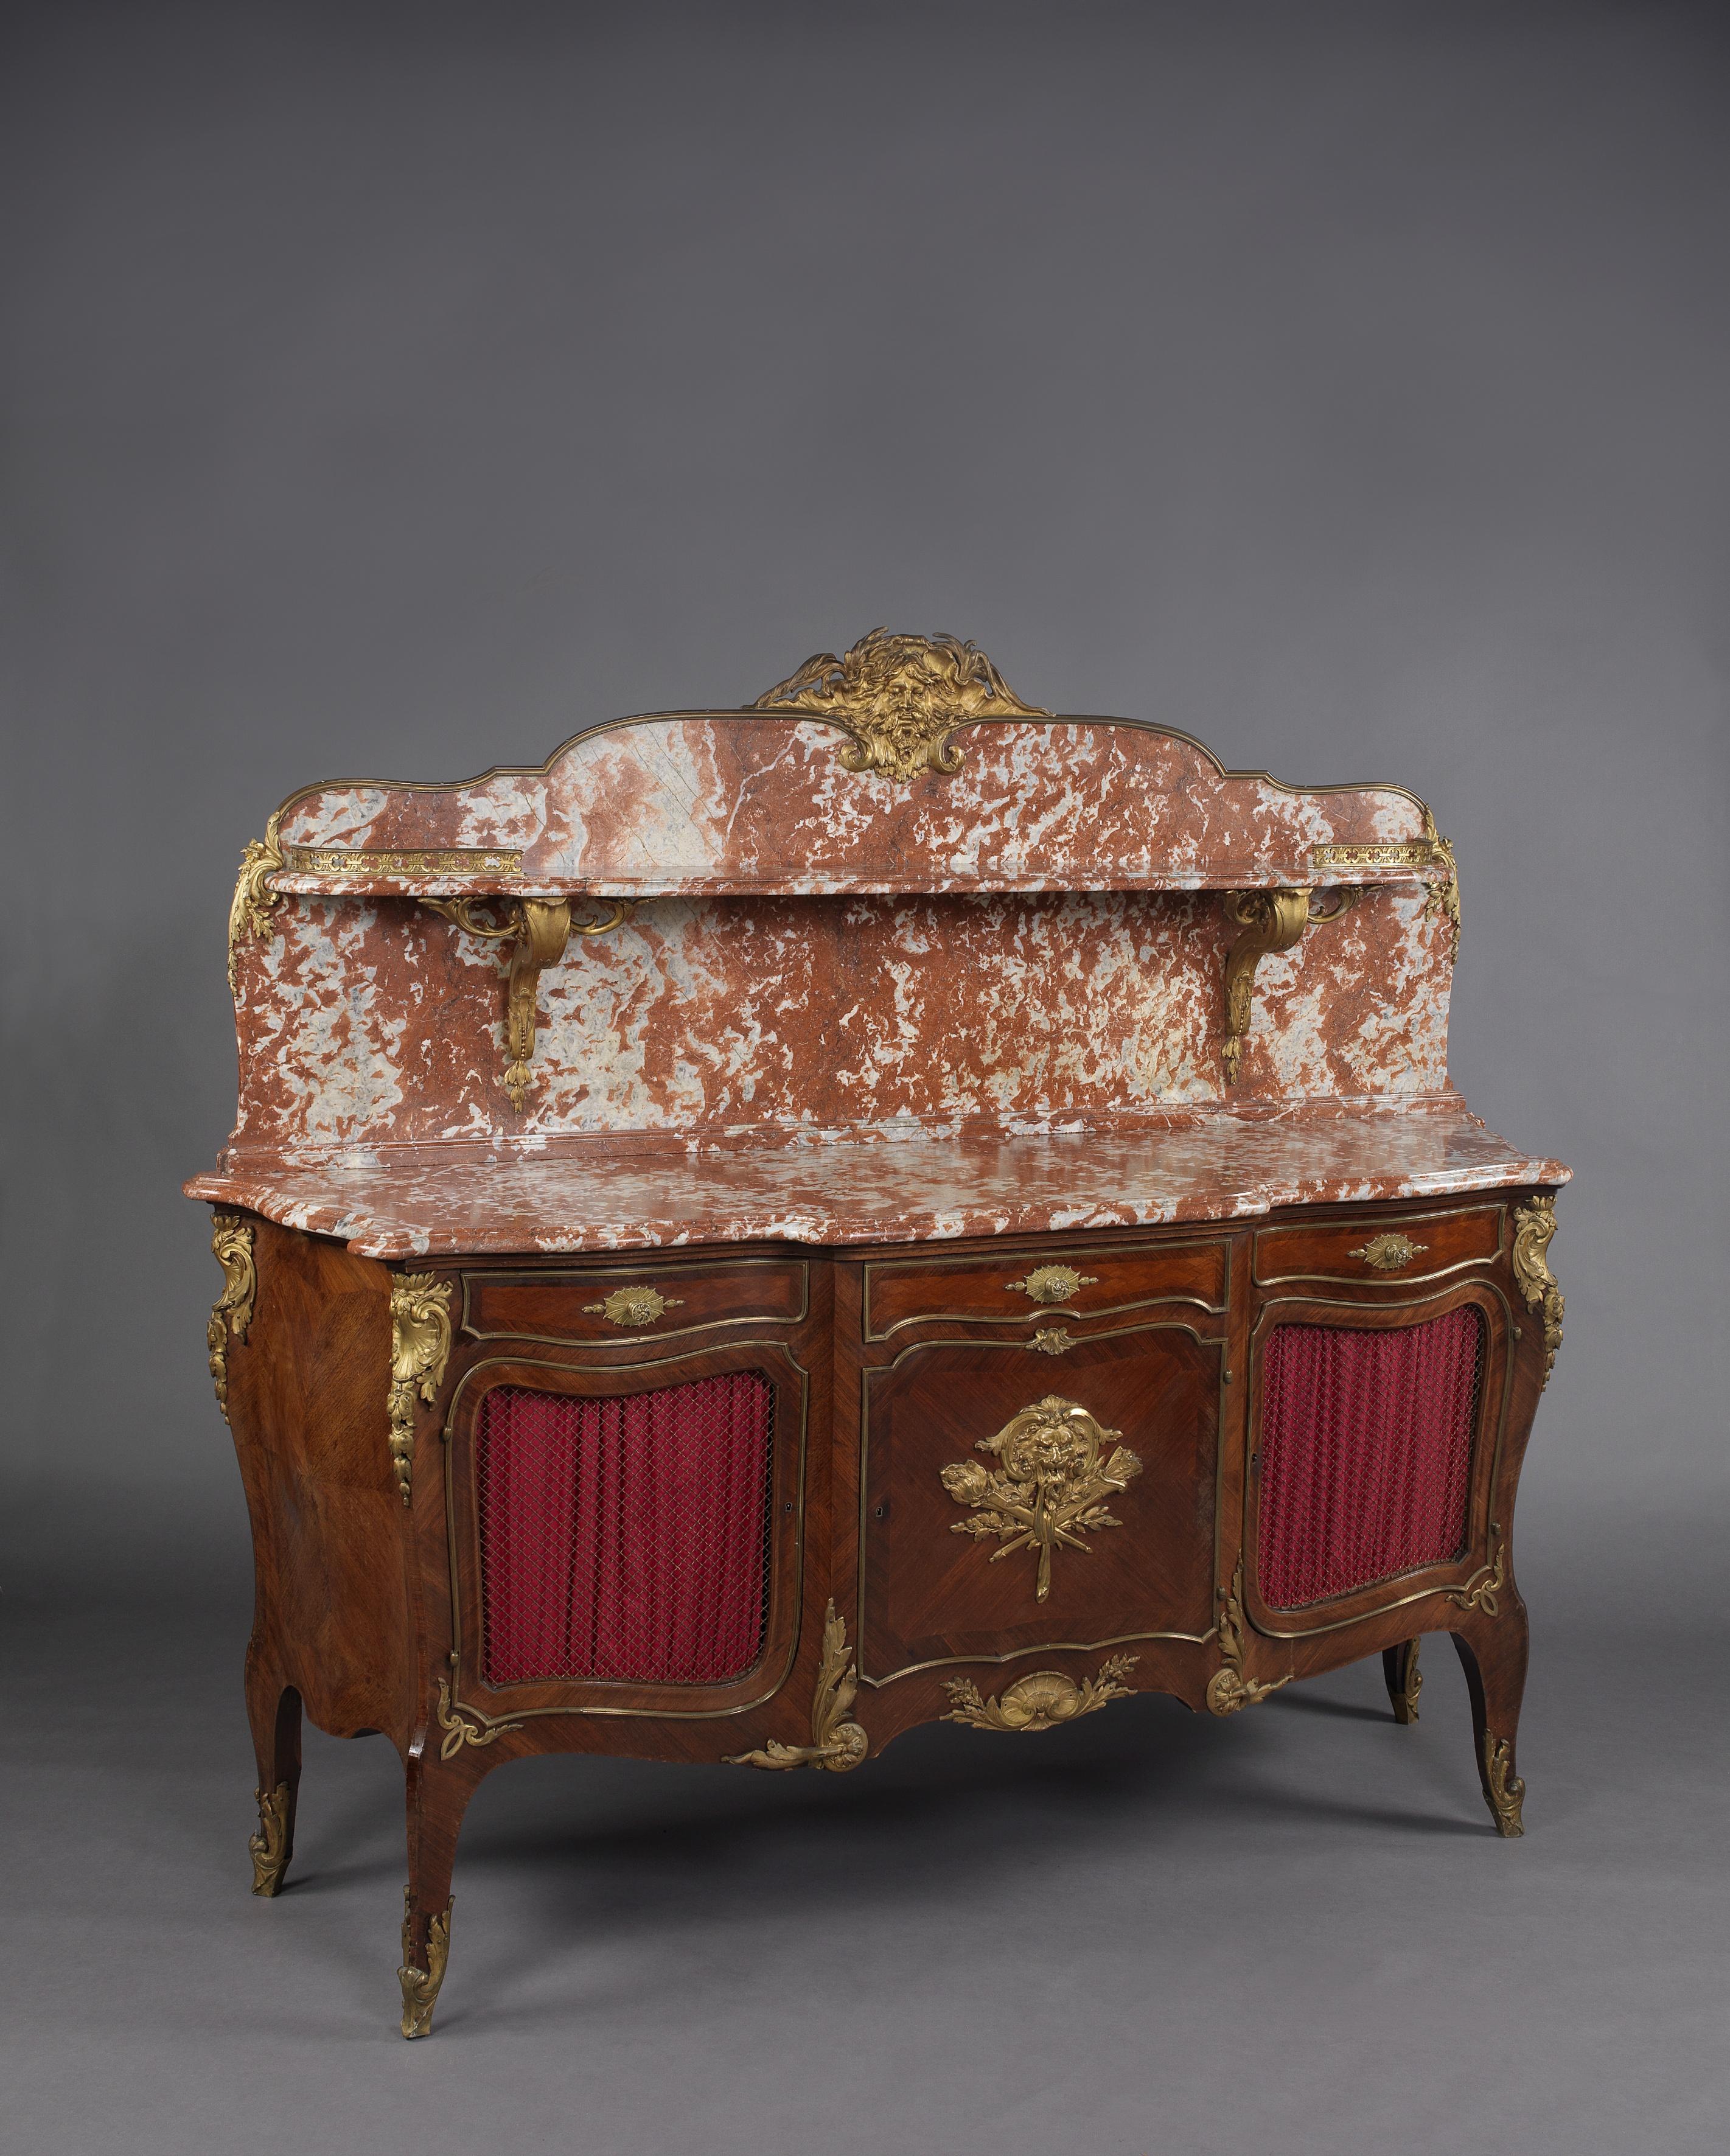 A fine Louis XVI style gilt-bronze mounted buffet a gradin, with a Rouge des Flandres marble-top and back panel. 

French, circa 1890. 

The bronze mounts stamped to the reverse 'ROGIE'. 

This imposing buffet has a Rouge des Flandres marble